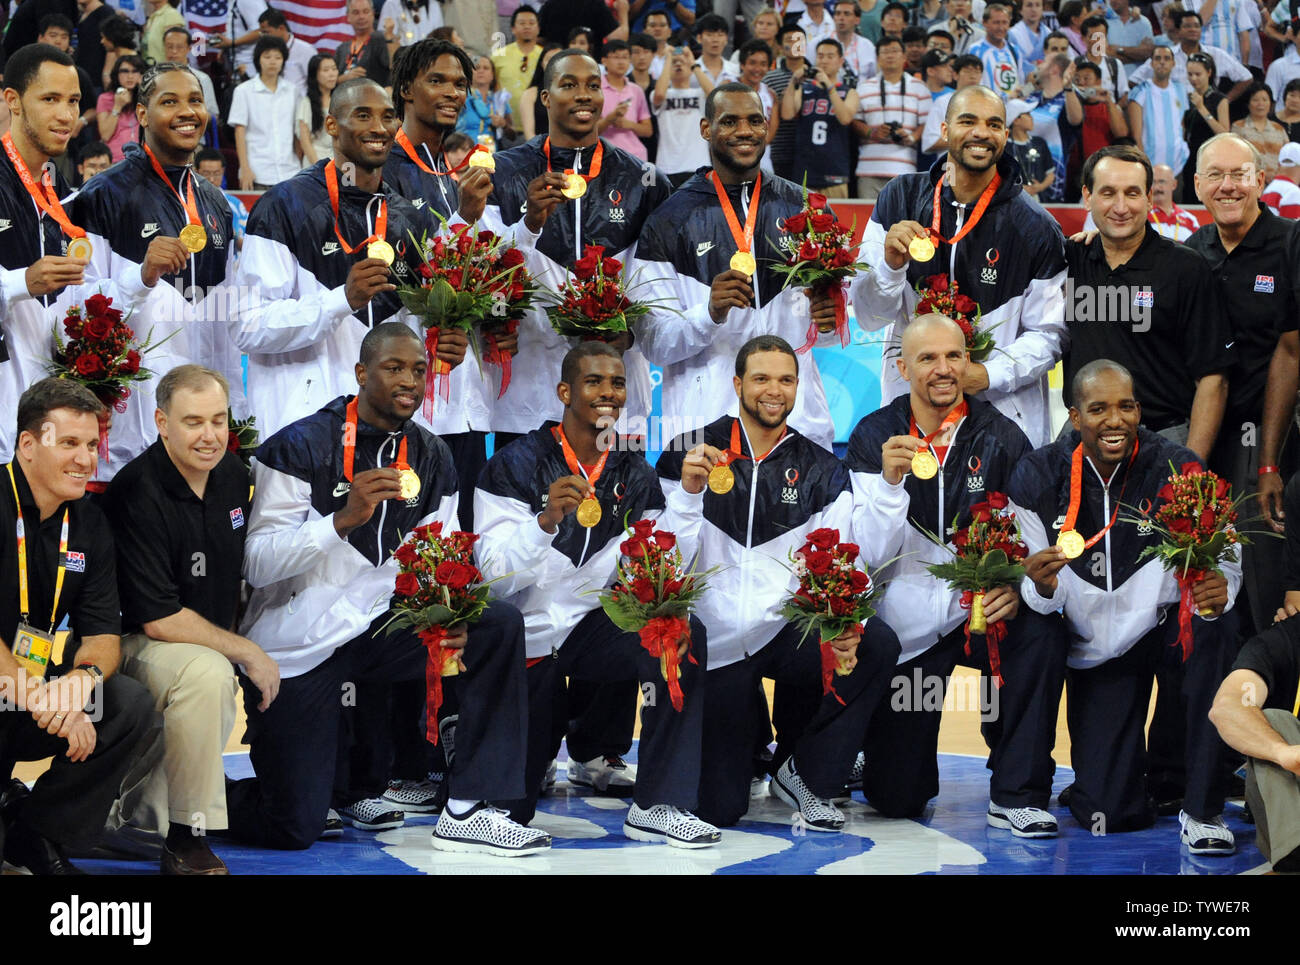 The Usa Team Shows Their Prize After The Win Over Spain To Claim The Gold Medal For Men S Basketball During The 08 Summer Olympics In Beijing On August 24 08 The Us